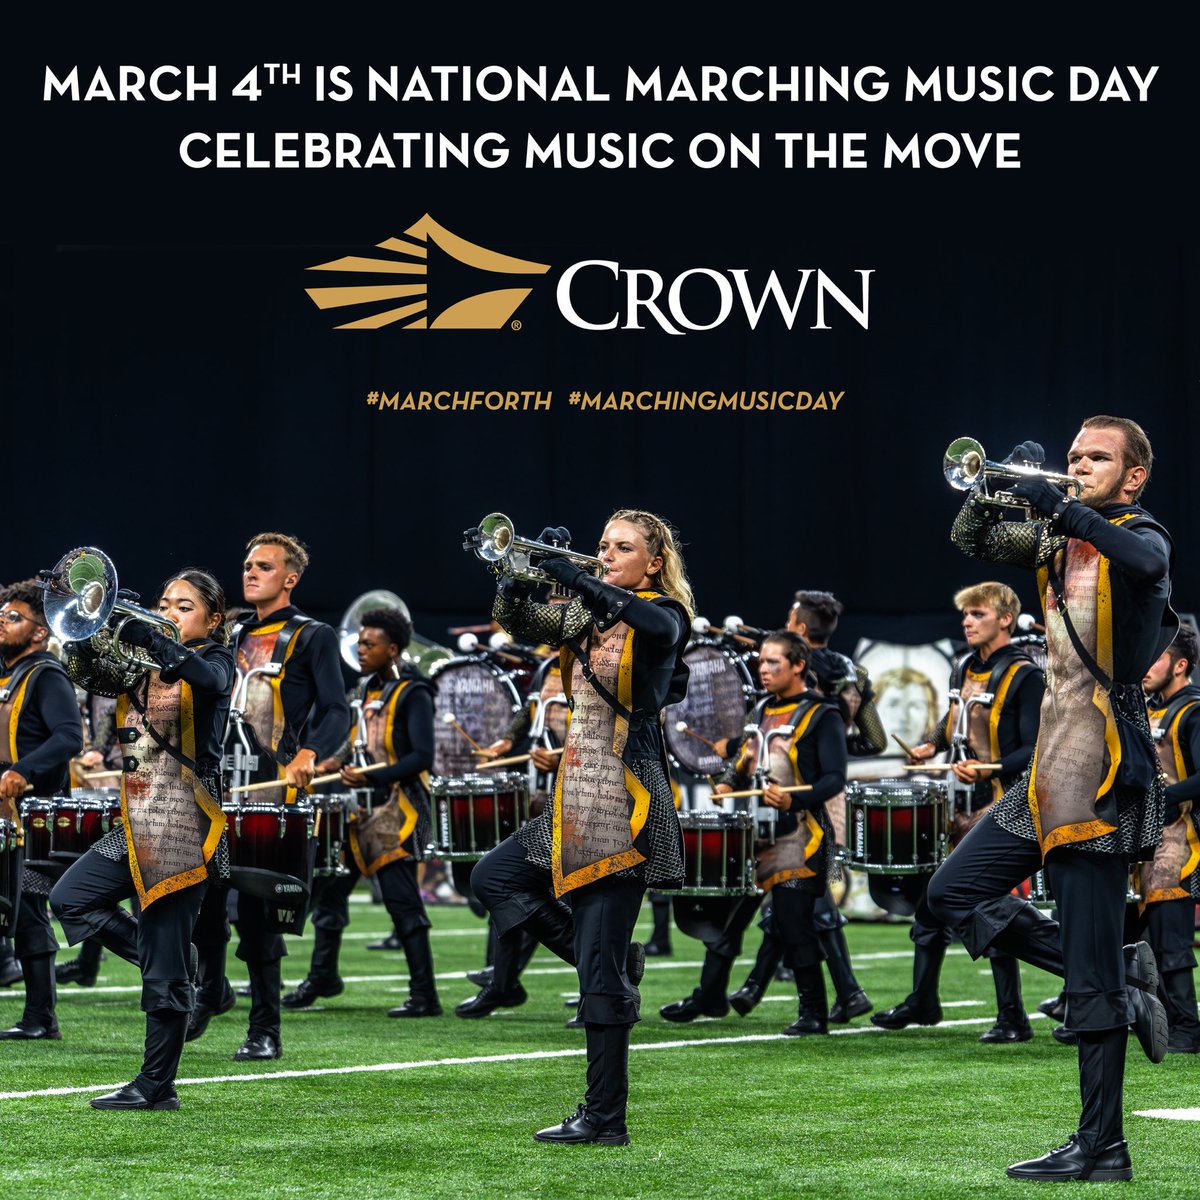 Happy March Forth from Carolina Crown! Join us in celebrating music on the move 👣🎵 #marchforth #marchingmusicday #crownbrass #crownguard #crownpercussion